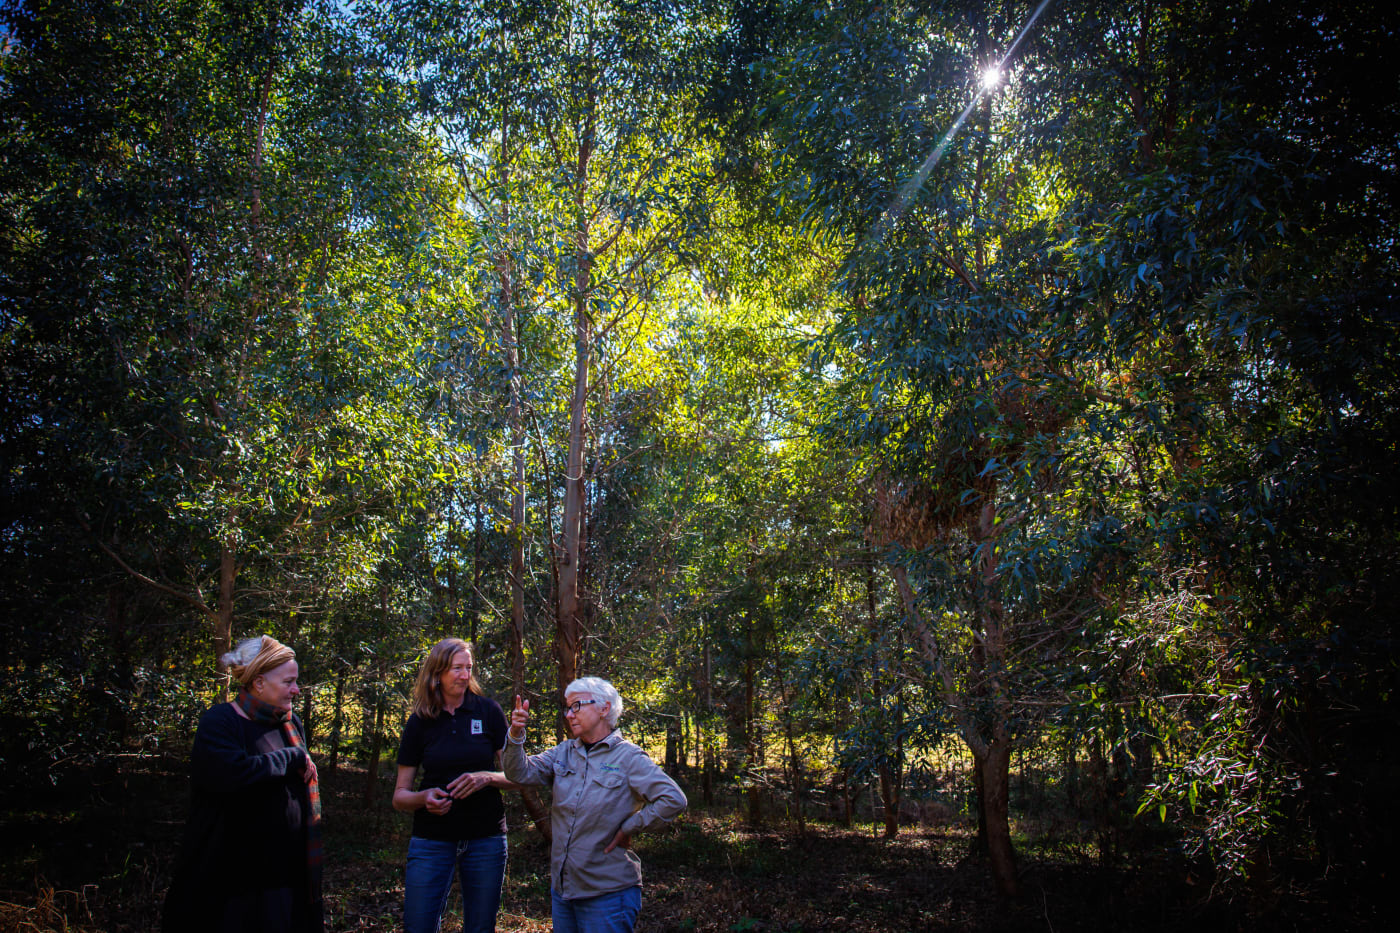 Now just under four years old, the trees tower over property owner Hilary Herrmann, WWF’s Tanya Pritchard, and Bangalow Koala’s Linda Sparrow.